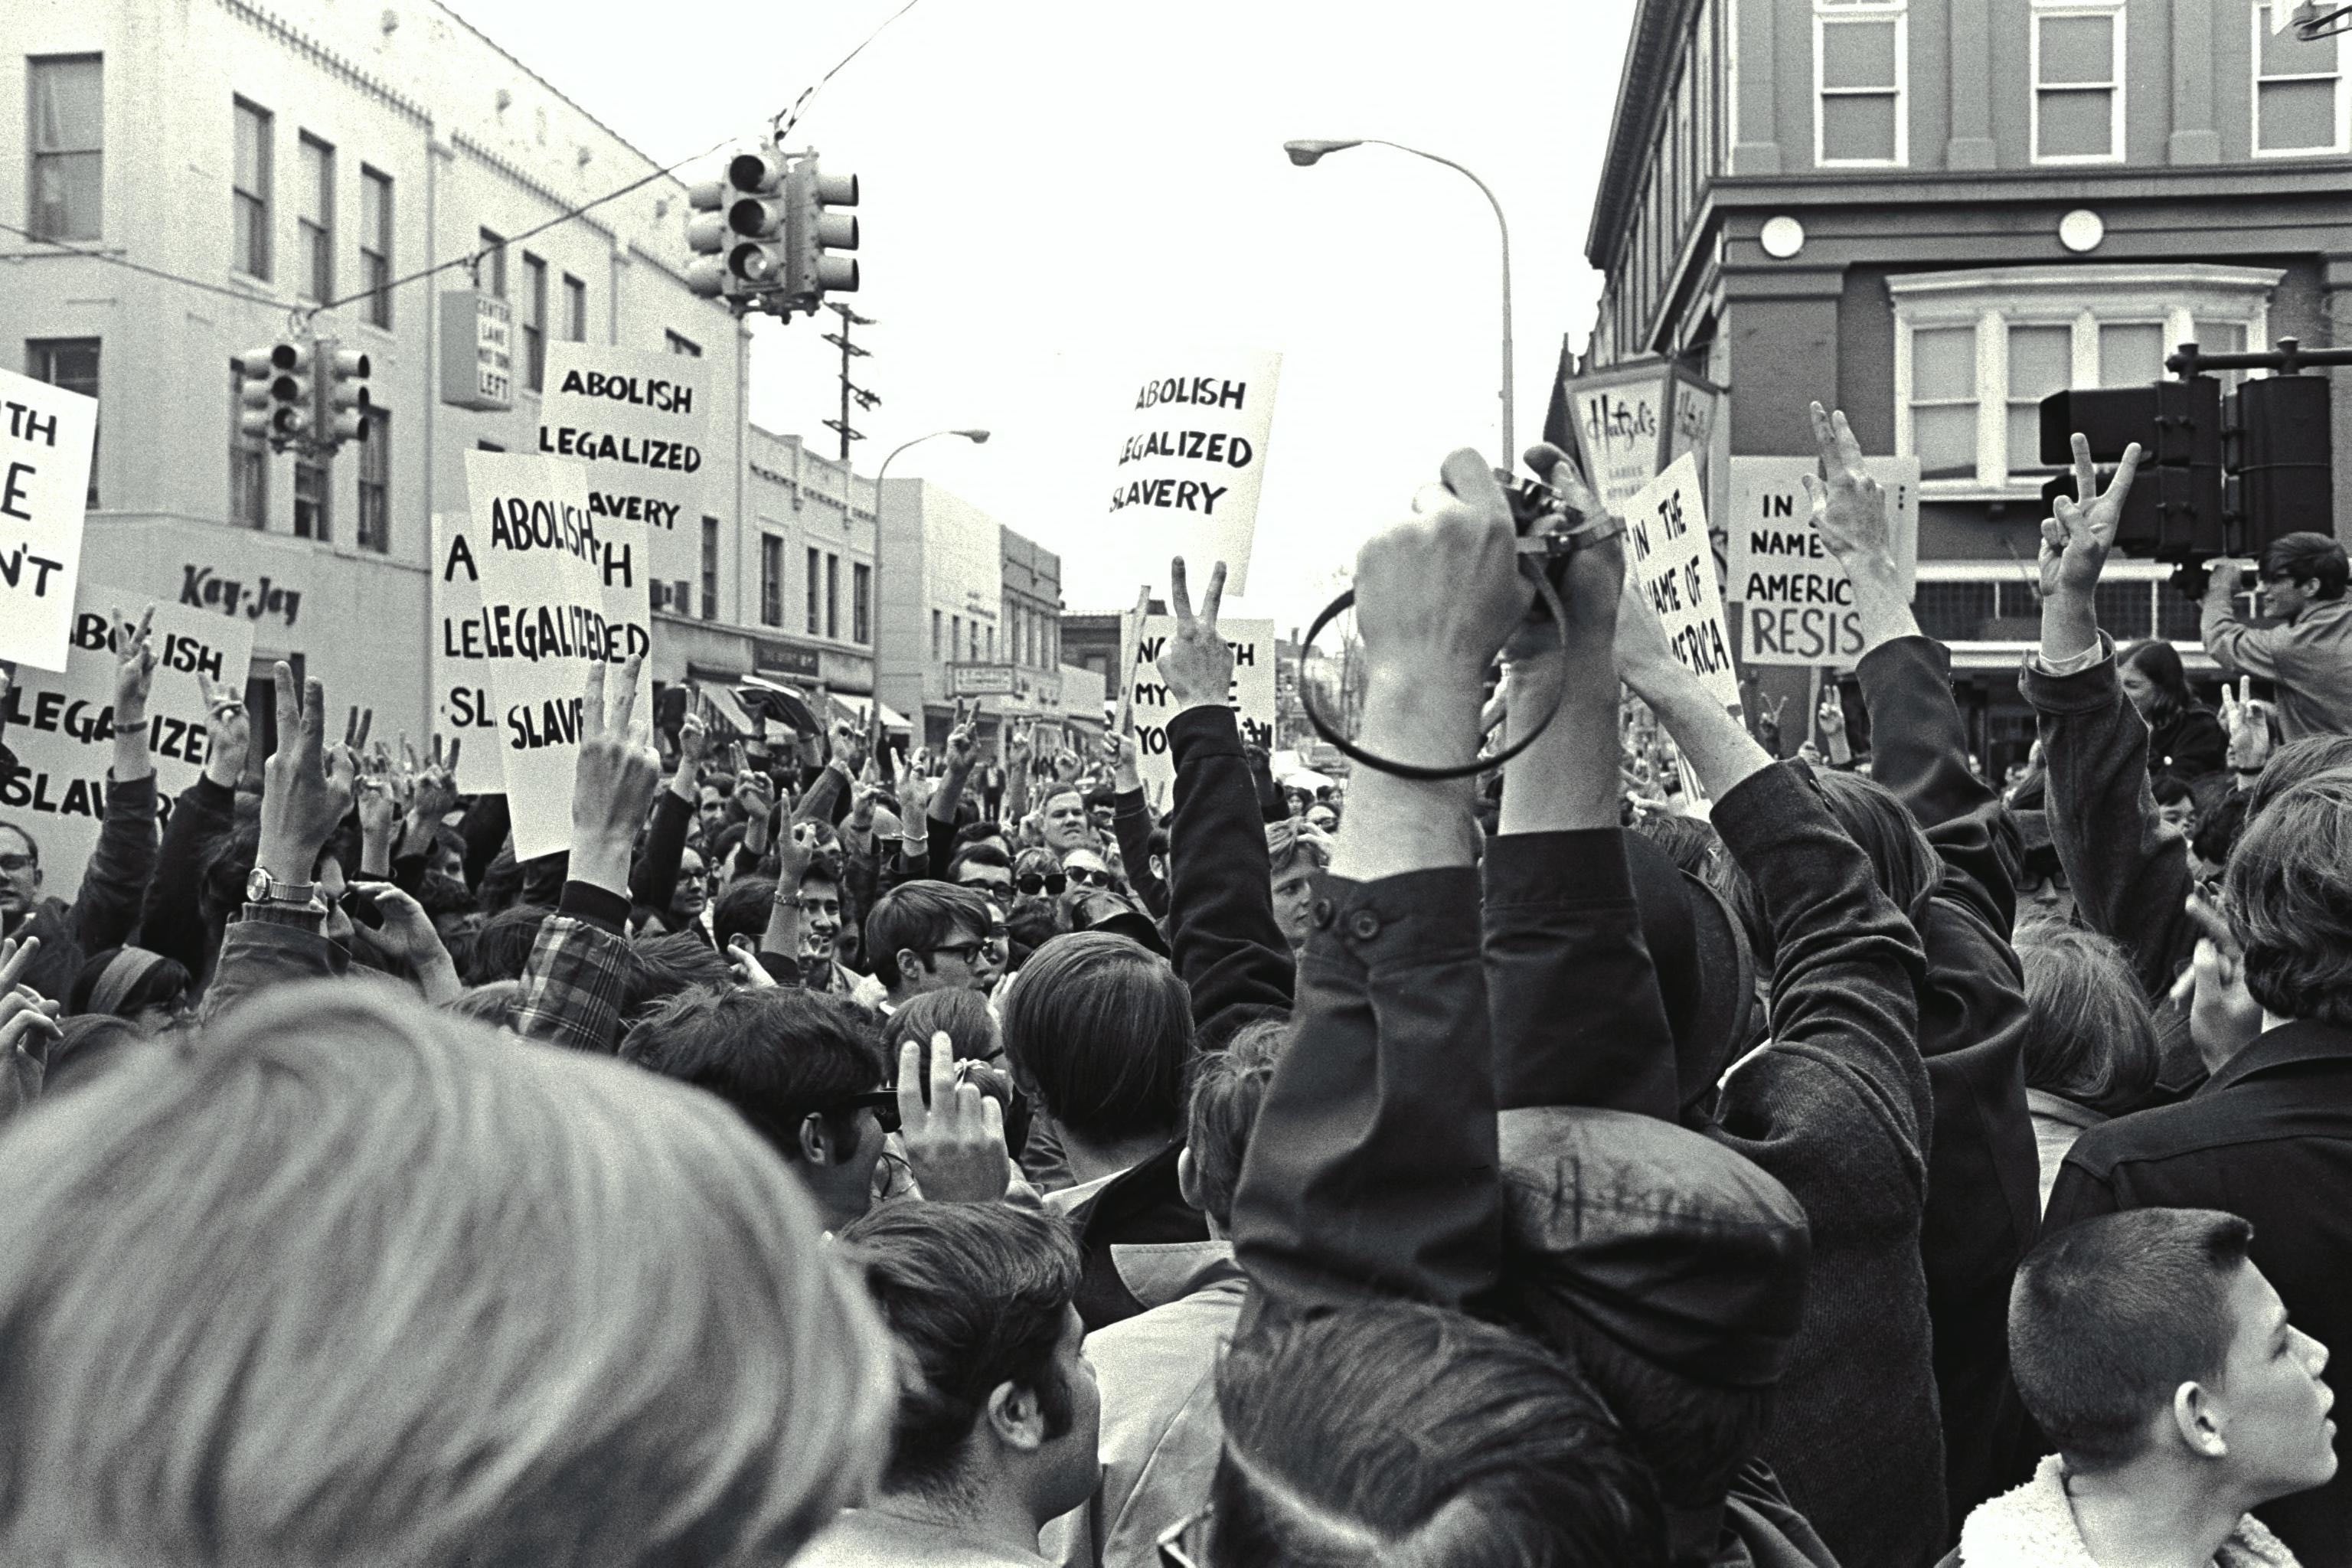 State Stree protest 1960s